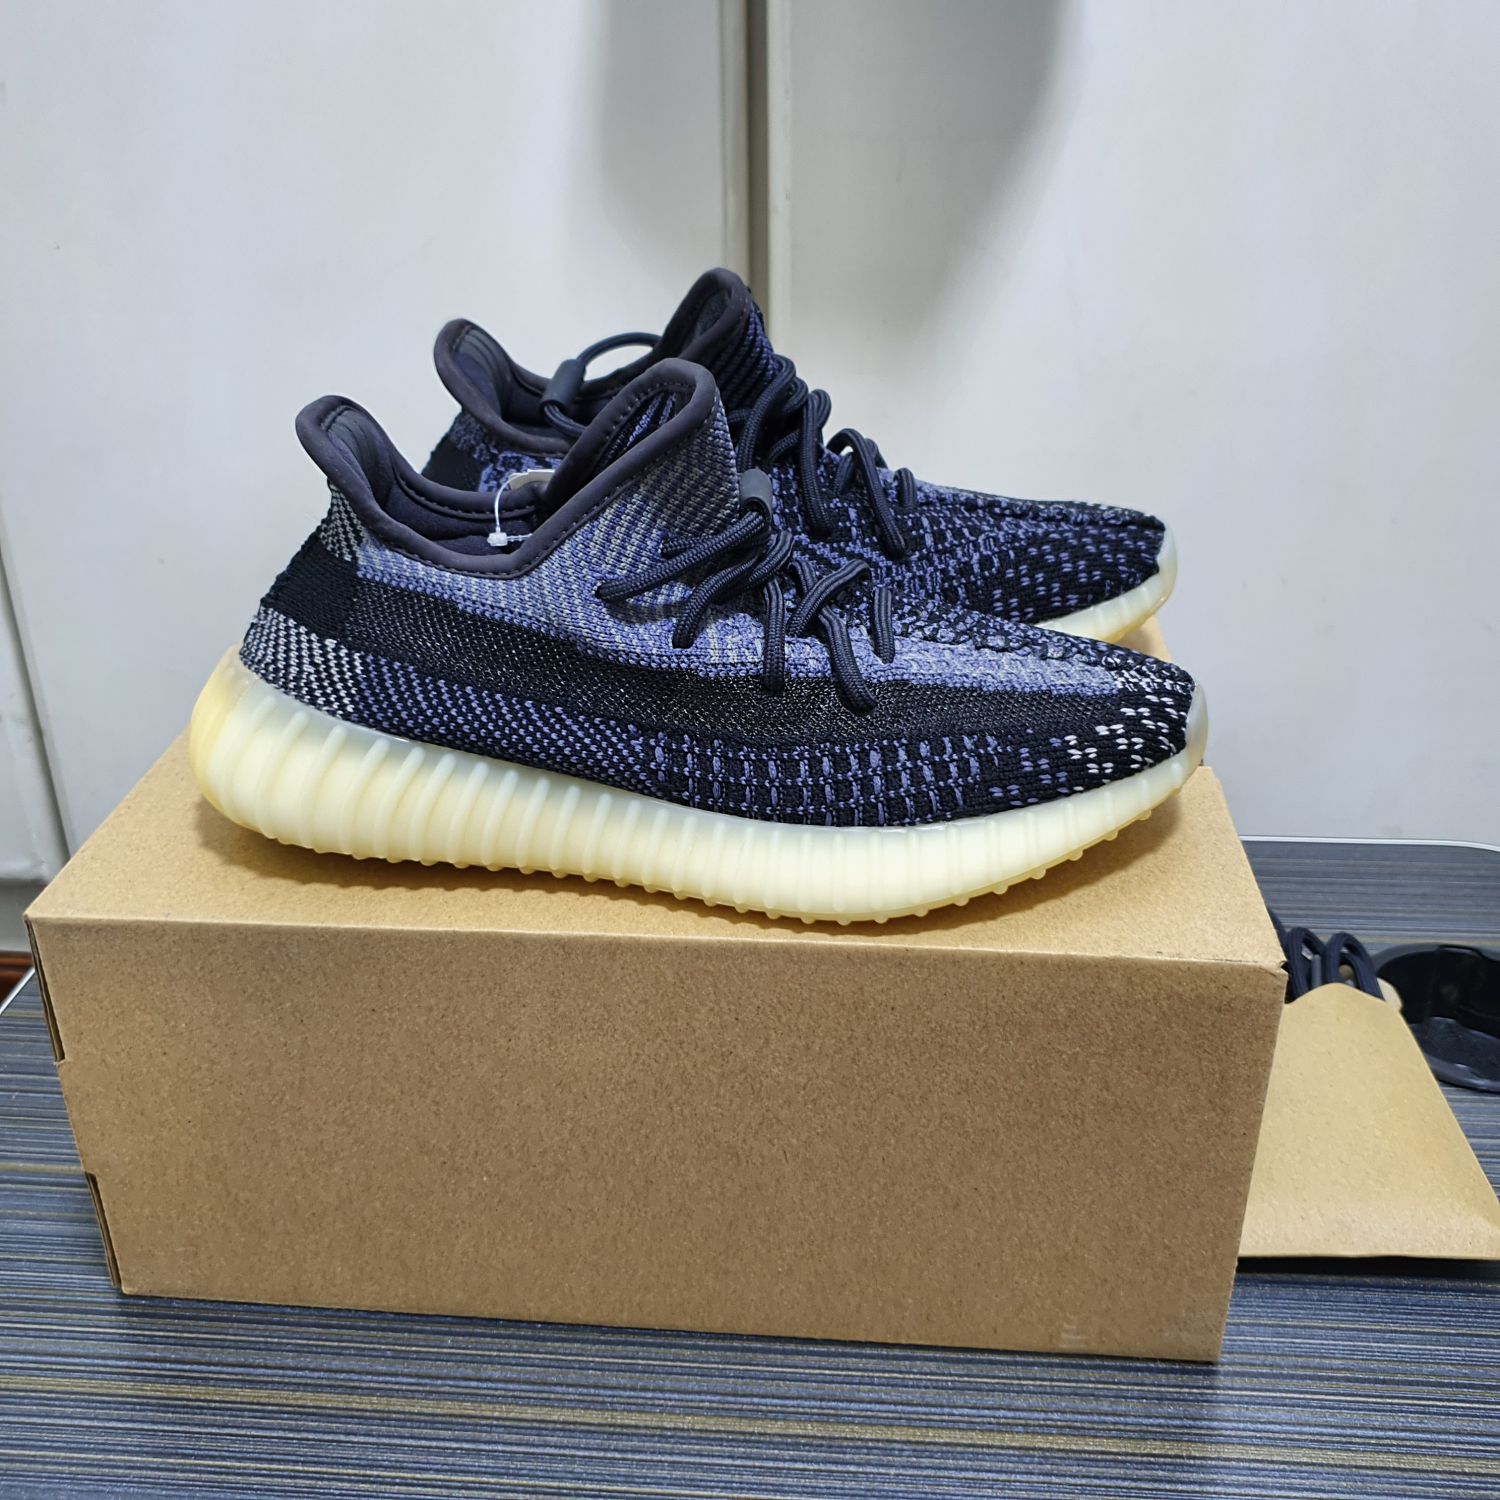 Adidas Yeezy Boost 350 V2 Carbon | AfterMarket